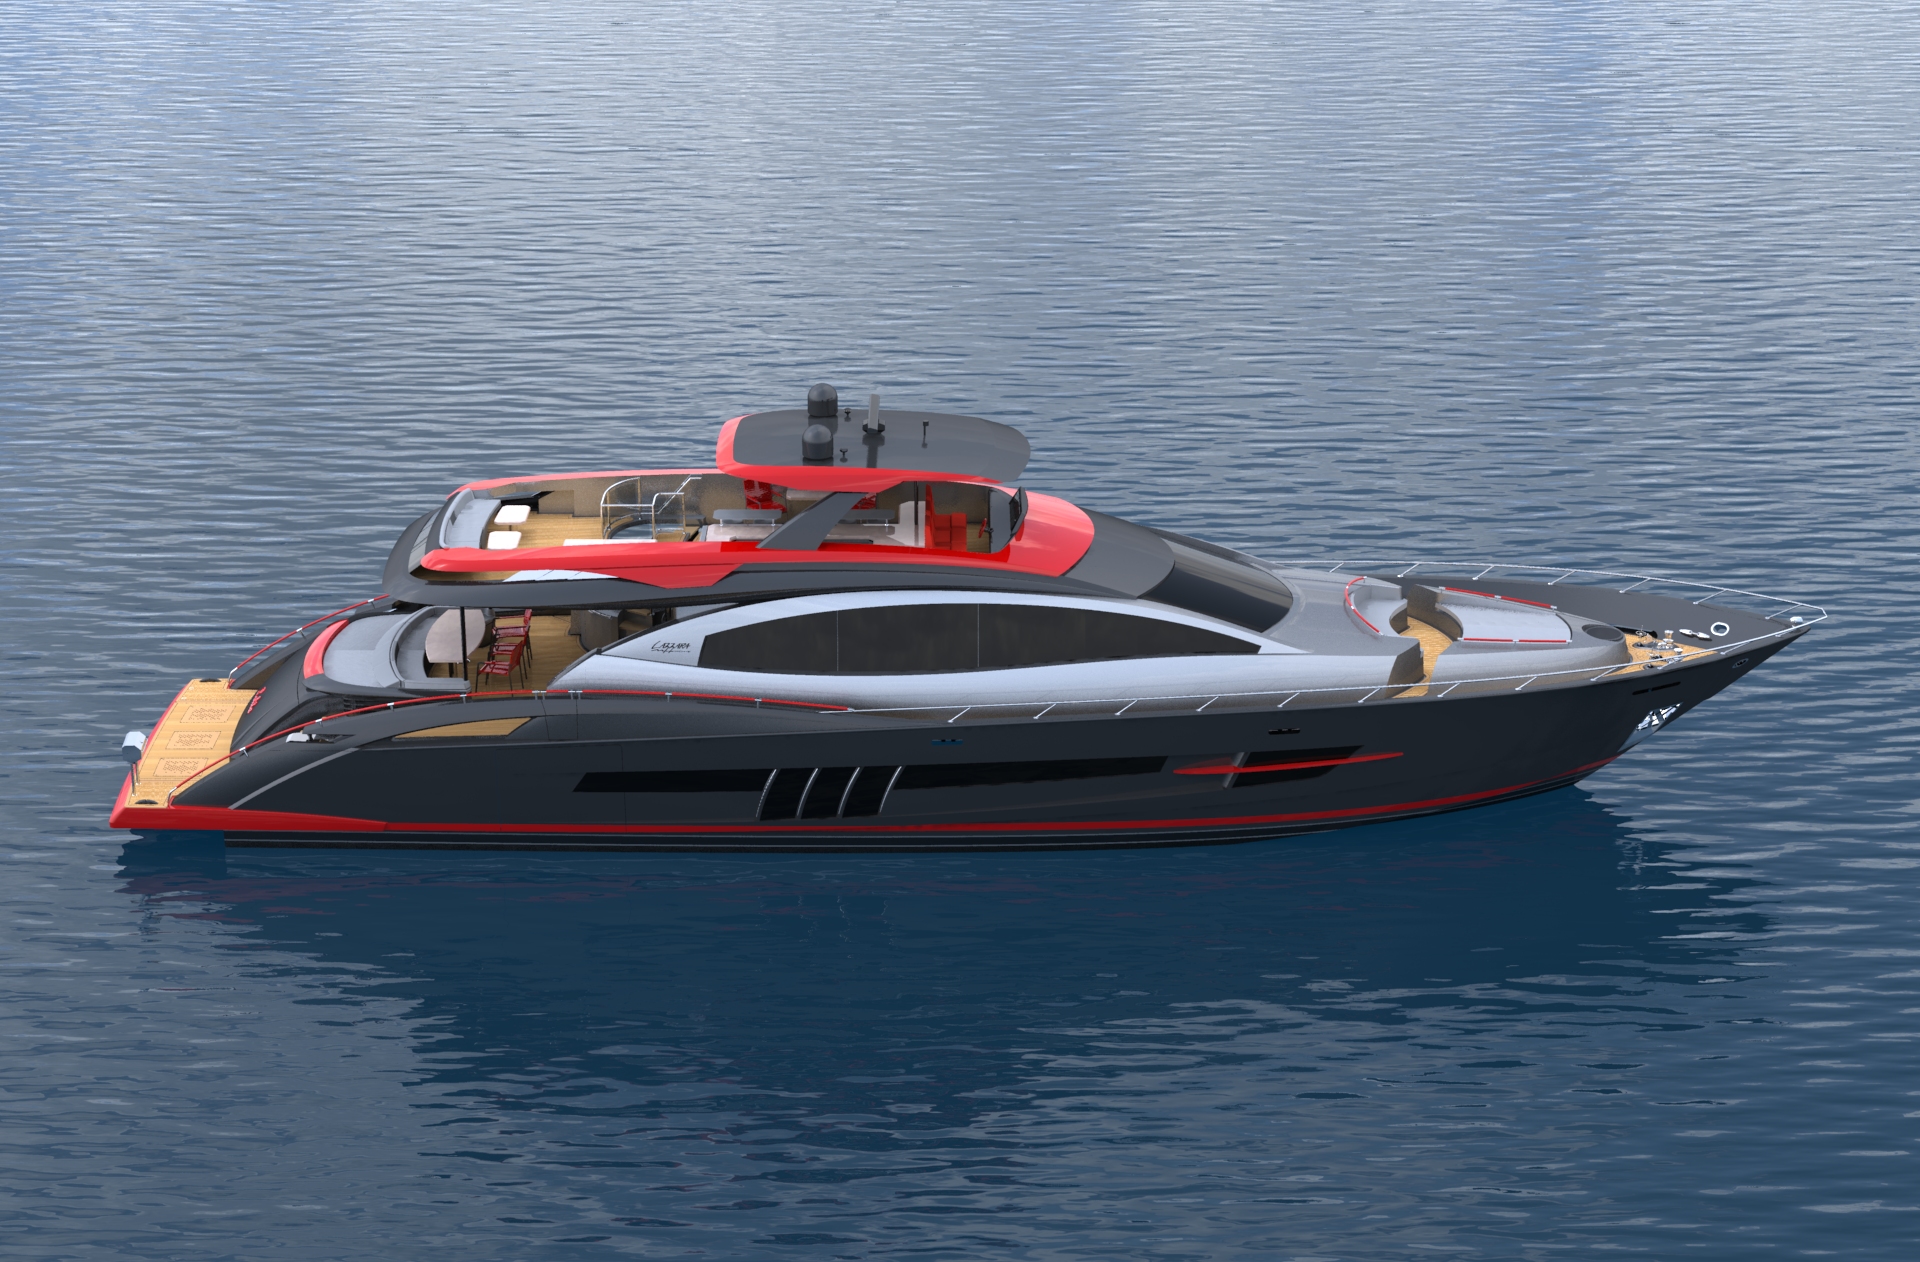 LSX95 motor yacht by Lazzara to be delivered in 2013